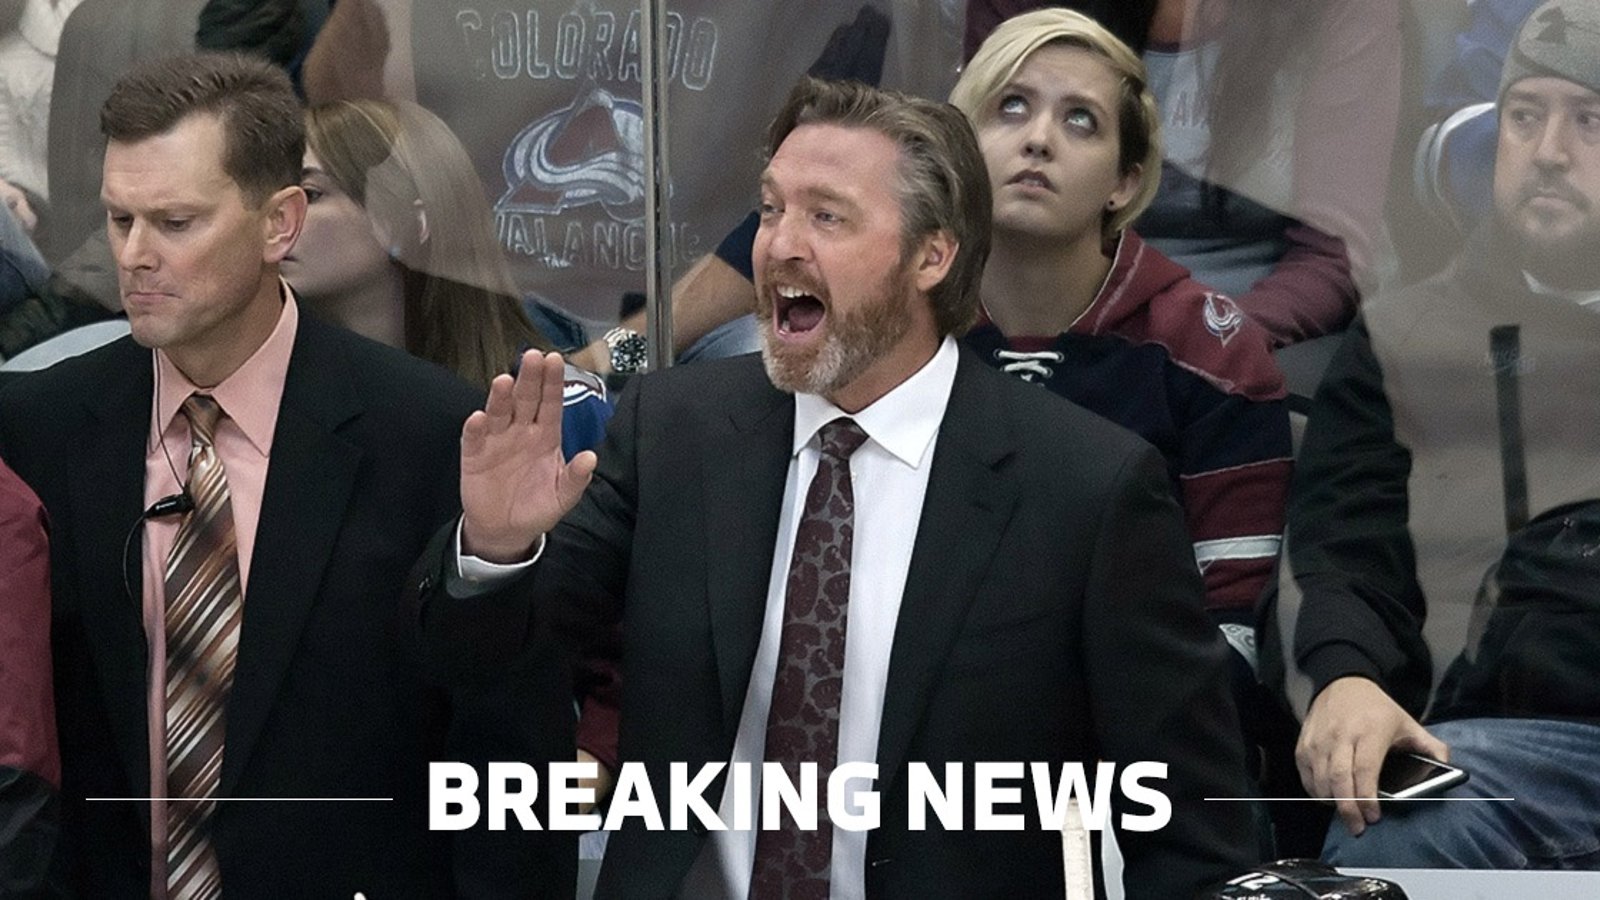 Breaking: Patrick Roy expected to interview for NHL head coaching job.